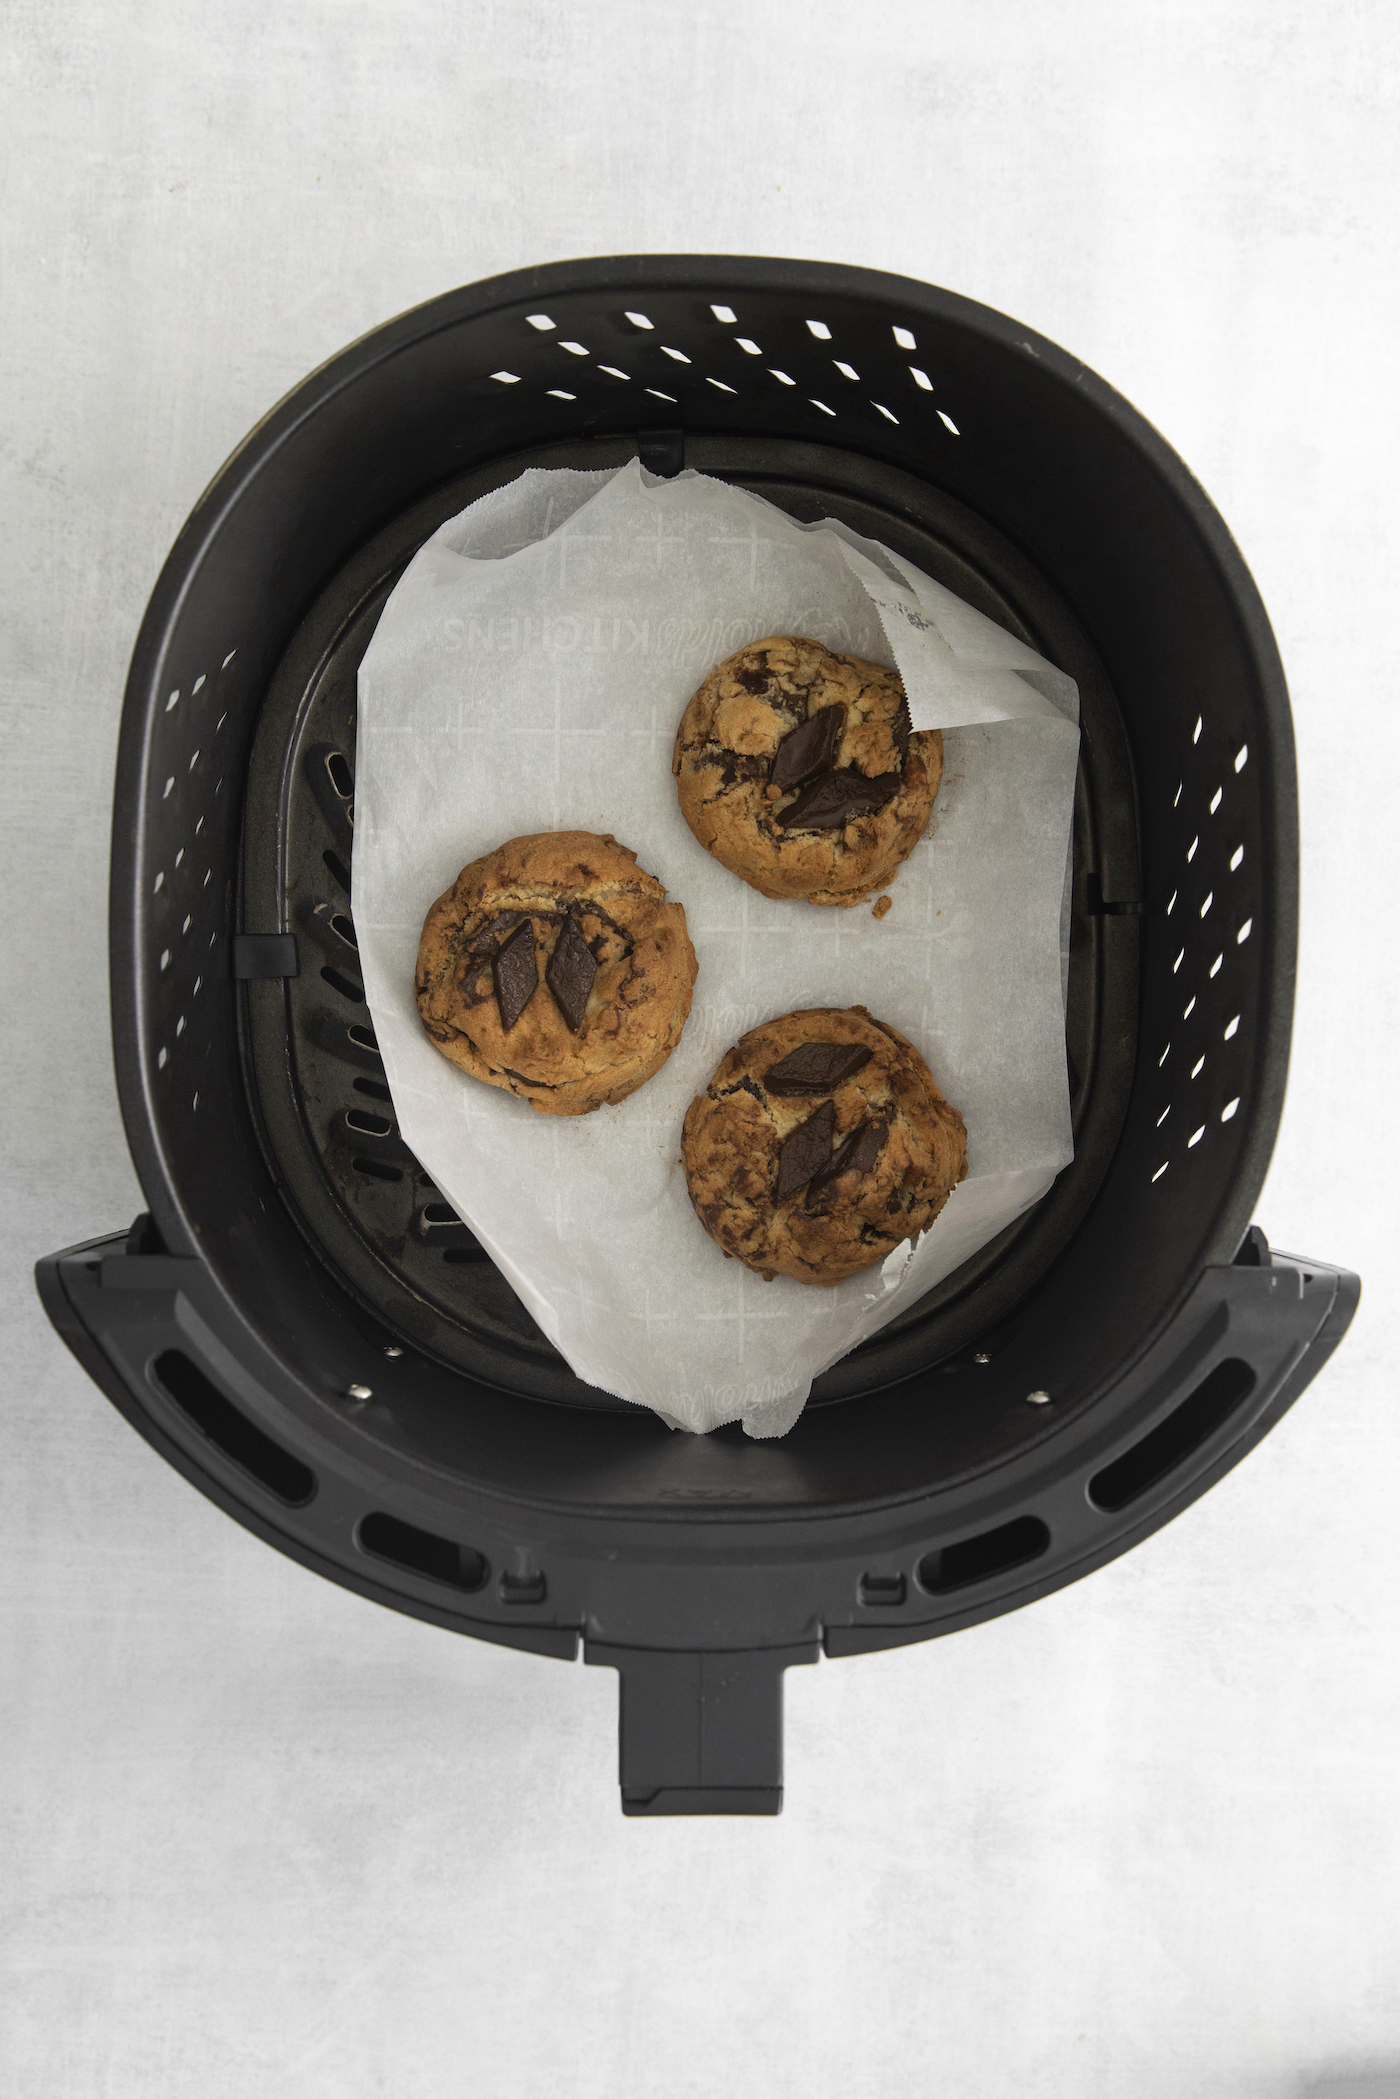 Chocolate chunk cookies made in the air fryer